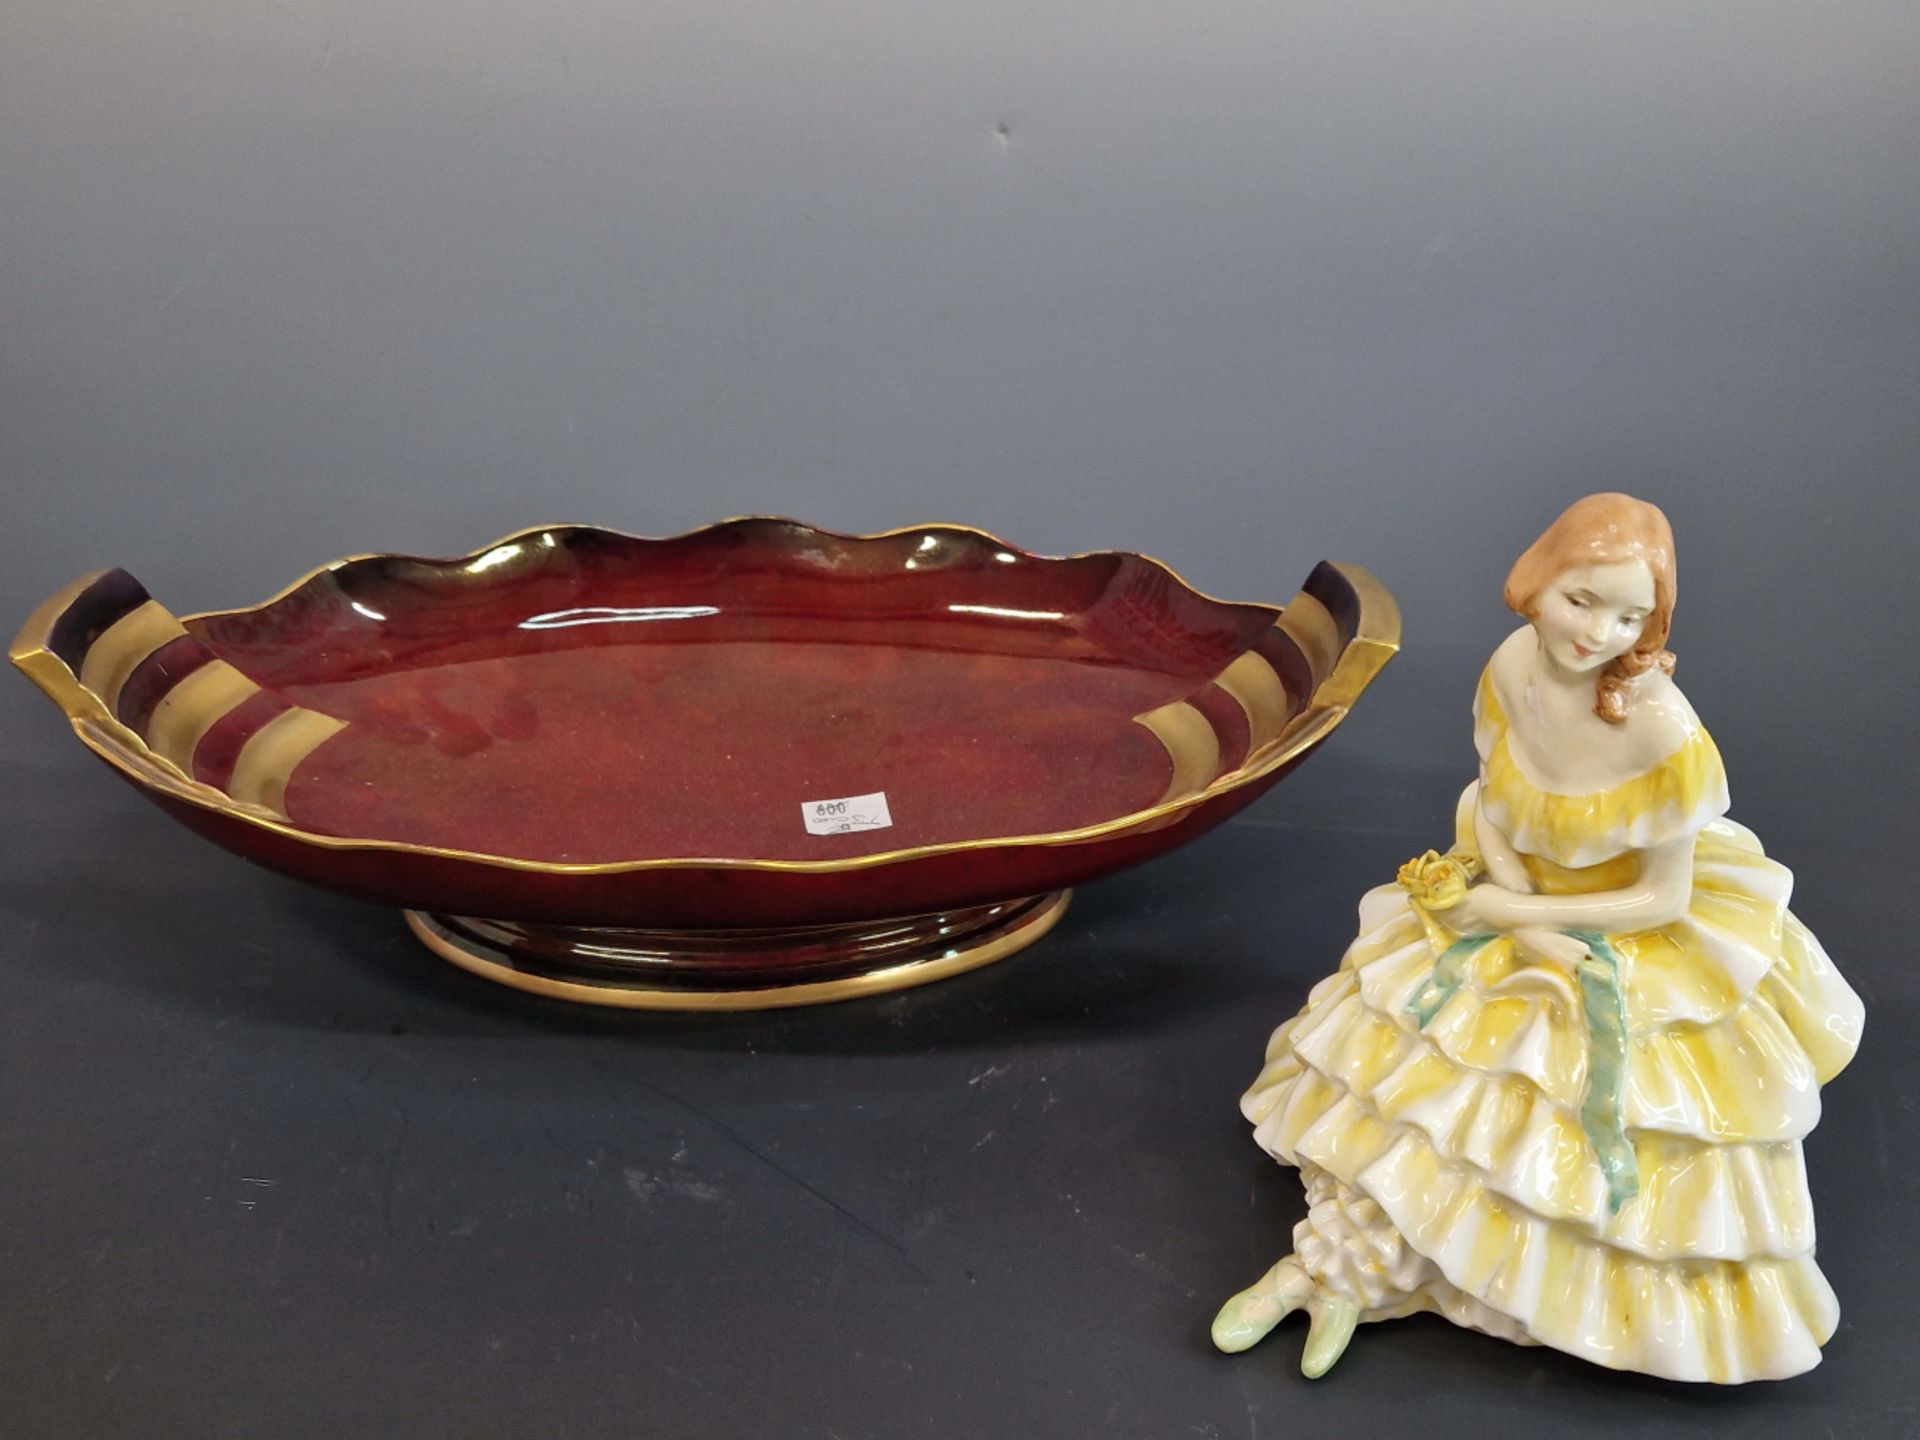 A ROYAL DOULTON FIGURE, HN 1503 TOGETHER WITH A CARLTON WARE ROUGE ROYALE OVAL DISH